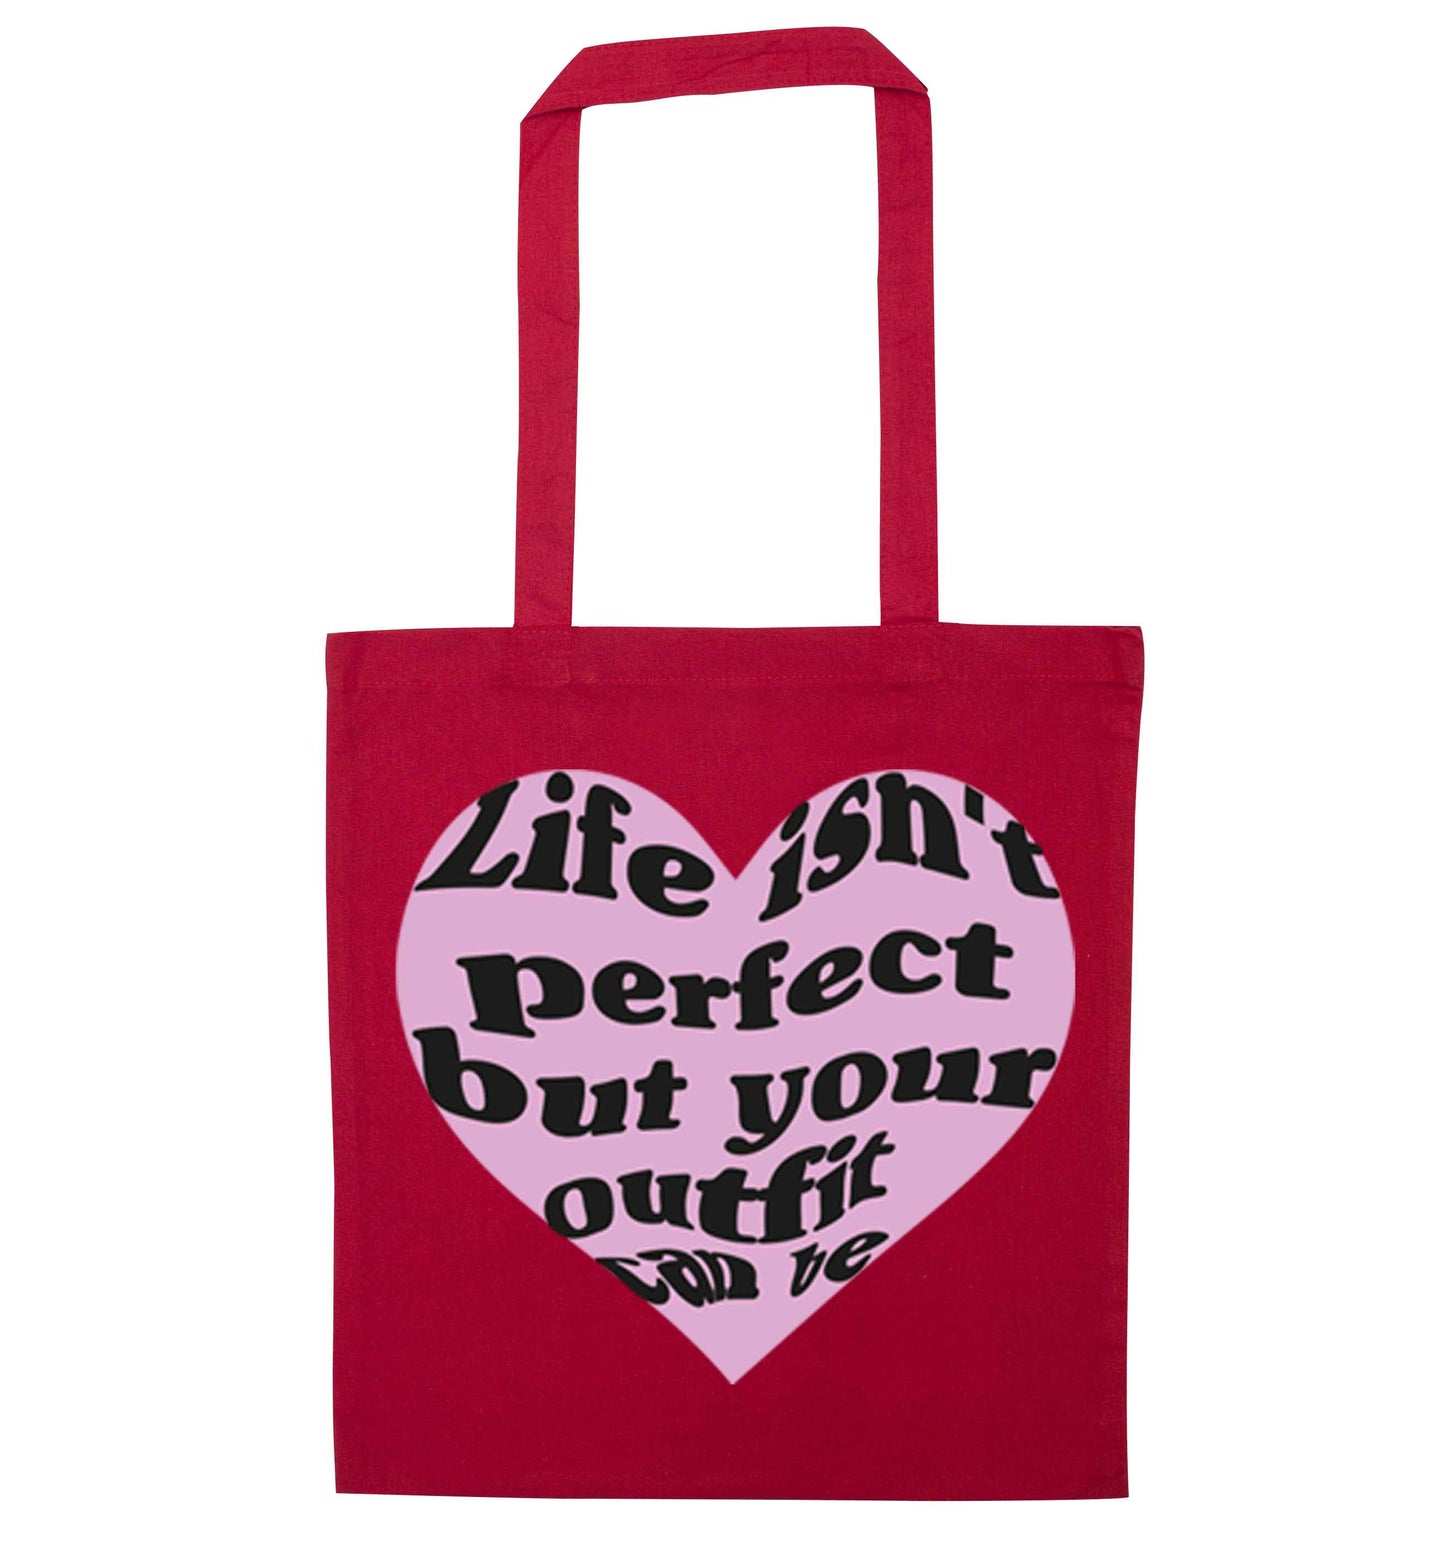 Life isn't perfect but your outfit can be red tote bag